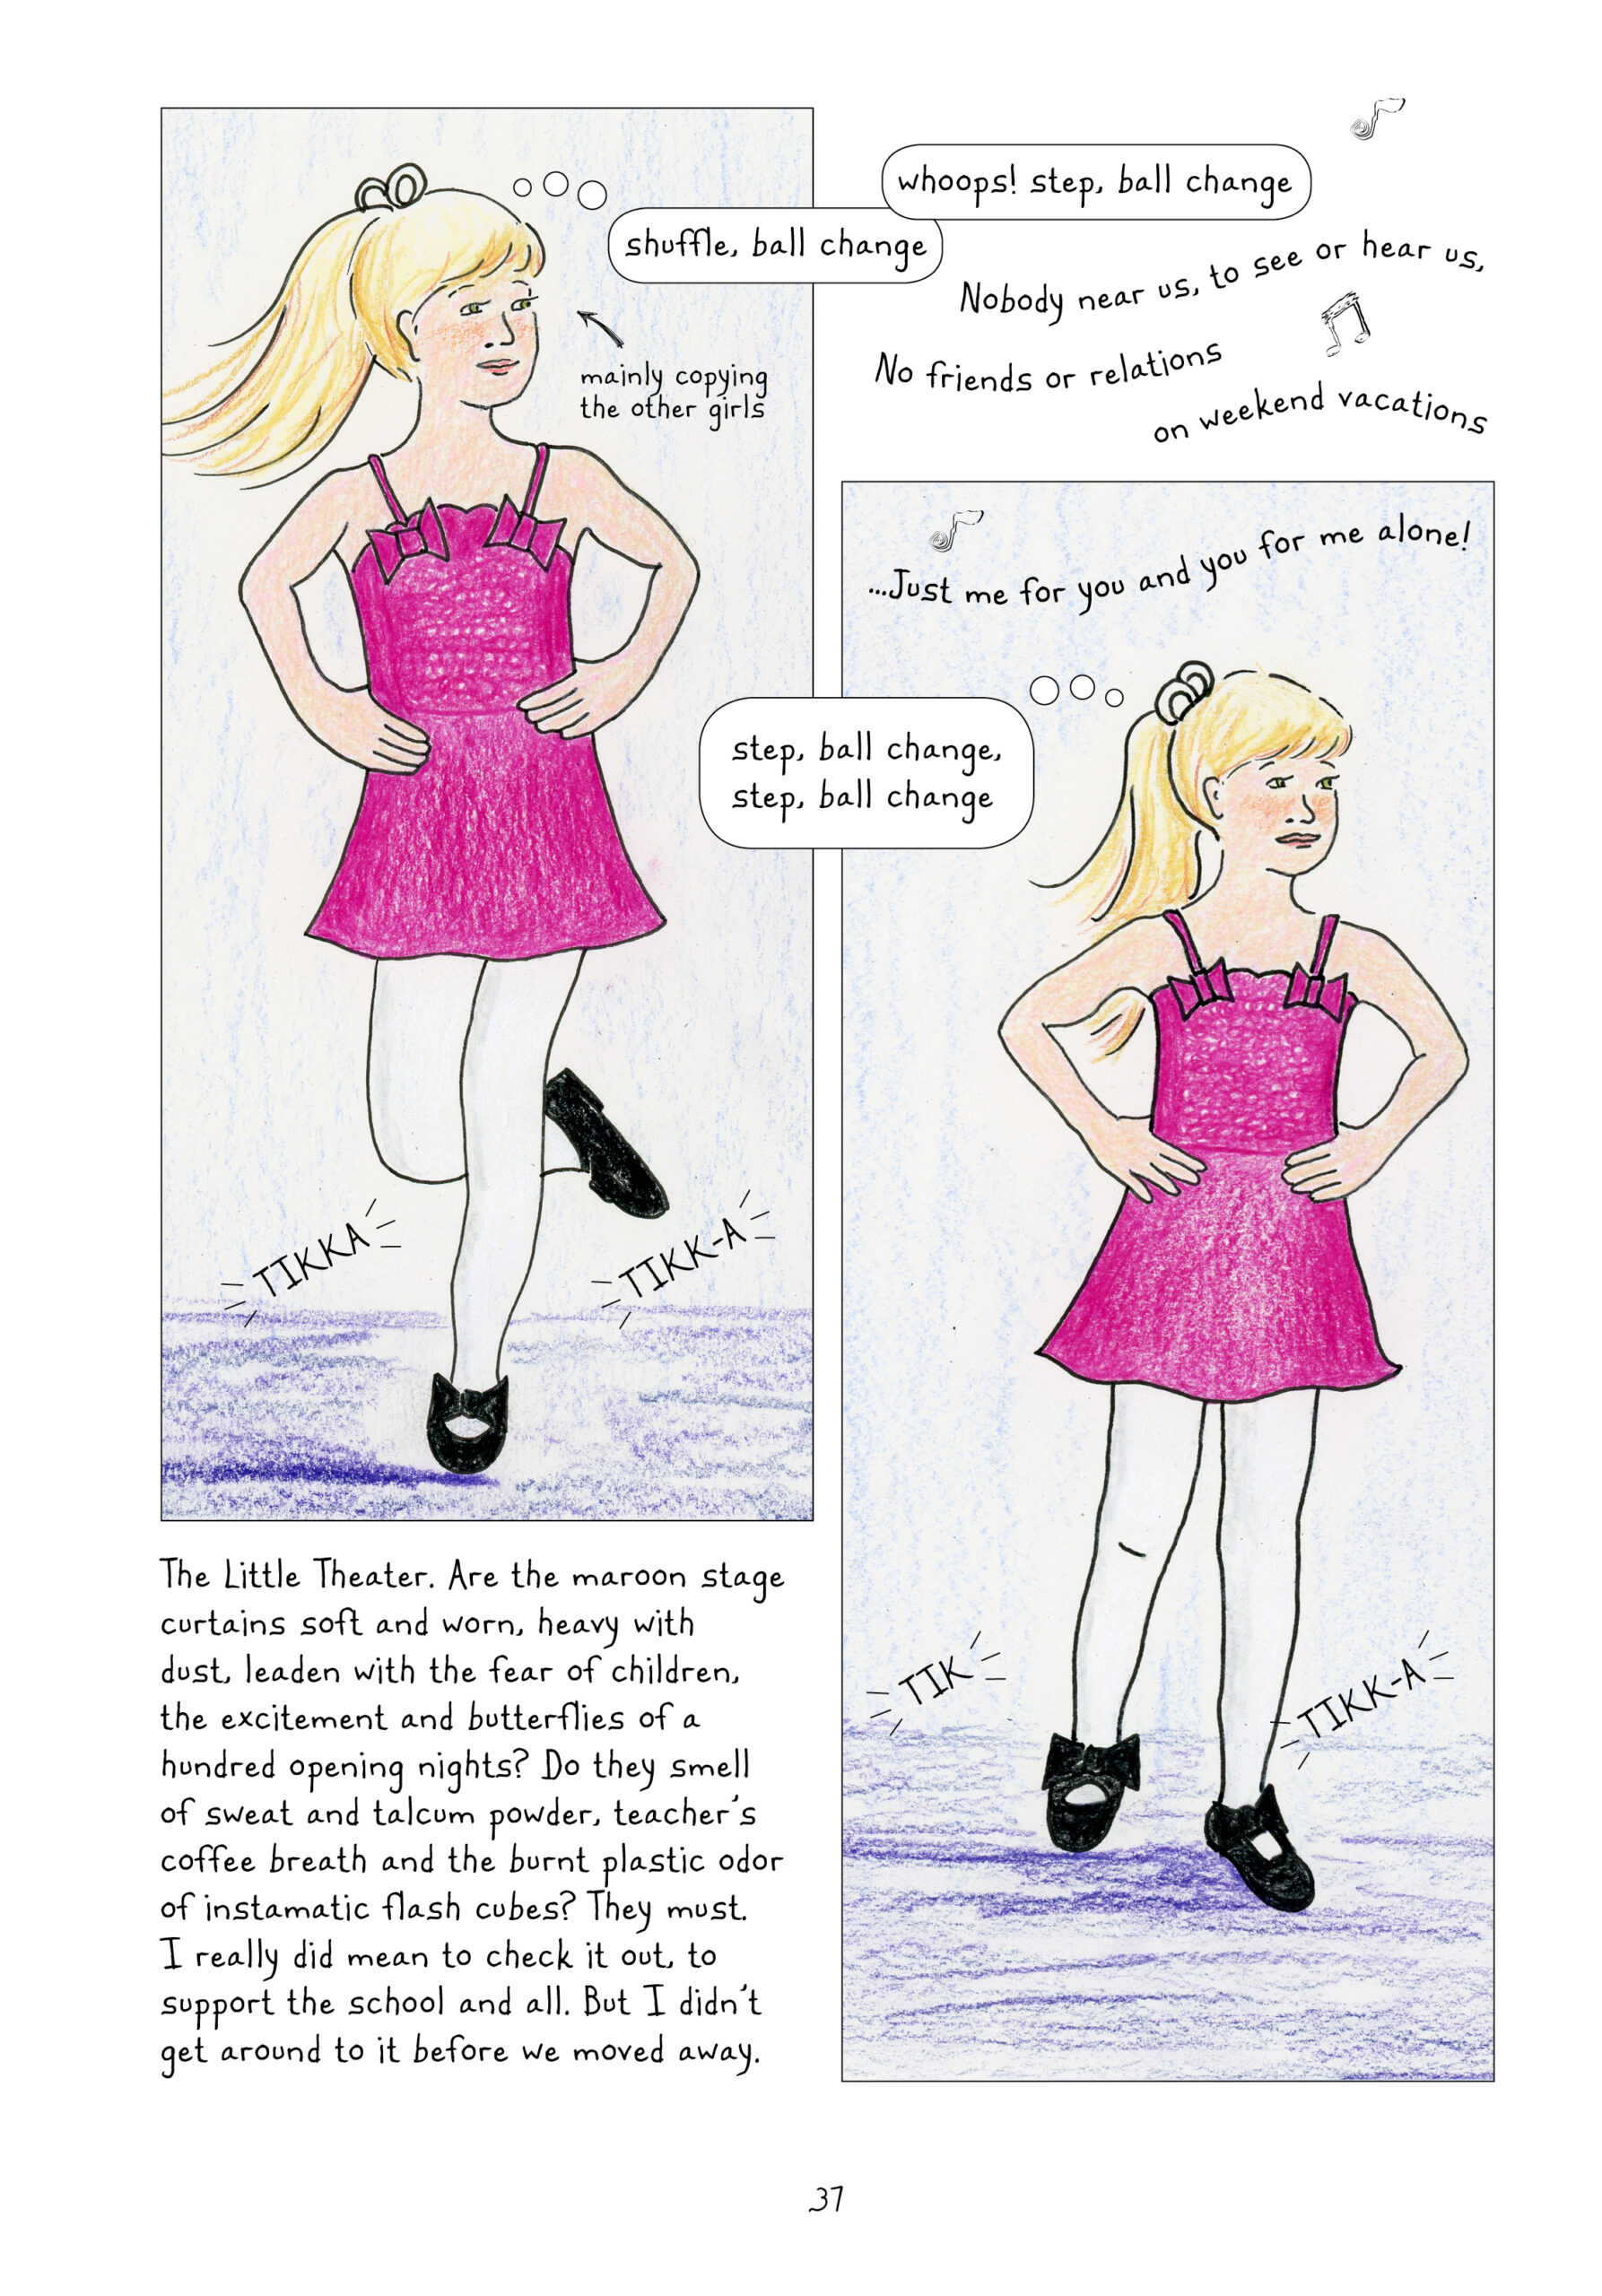 Lynn as a young girl wears a pink dance dress, with spaghetti straps and decorative bows, and white tights with the black tap shoes from before. Her hair is tied up in a pony tail with a white ribbon. She smiles stiffly. Her hands are on her hips as she tap dances: "tikkah tikk-ah." She bends her right knee behind her towards the left. She thinks to herself, "shuffle, ball change." Narrator Lynn notes that she is "mainly copying the other girls." Young Lynn continues thinking, "whoops! step, ball change." Music plays, "Nobody near us, to see or hear us, No friends or relations, on weekend vacations... Just me for you and you for me alone!" Young Lynn continues tap dancing, bringing her right foot down: "tik! tikk-ah." Lynn narrates, "The Little Theater. Are the maroon stage curtains soft and worn, heavy with dust, leaden with the fear of children, the excitement and butterflies of a hundred opening nights? Do they smell of sweat and talcum powder, teacher's coffee breath and the burnt plastic odor of instamatic flash cubes? They must. I really did mean to check it out, to support the school and all. But I didn't get around to it before we moved away."